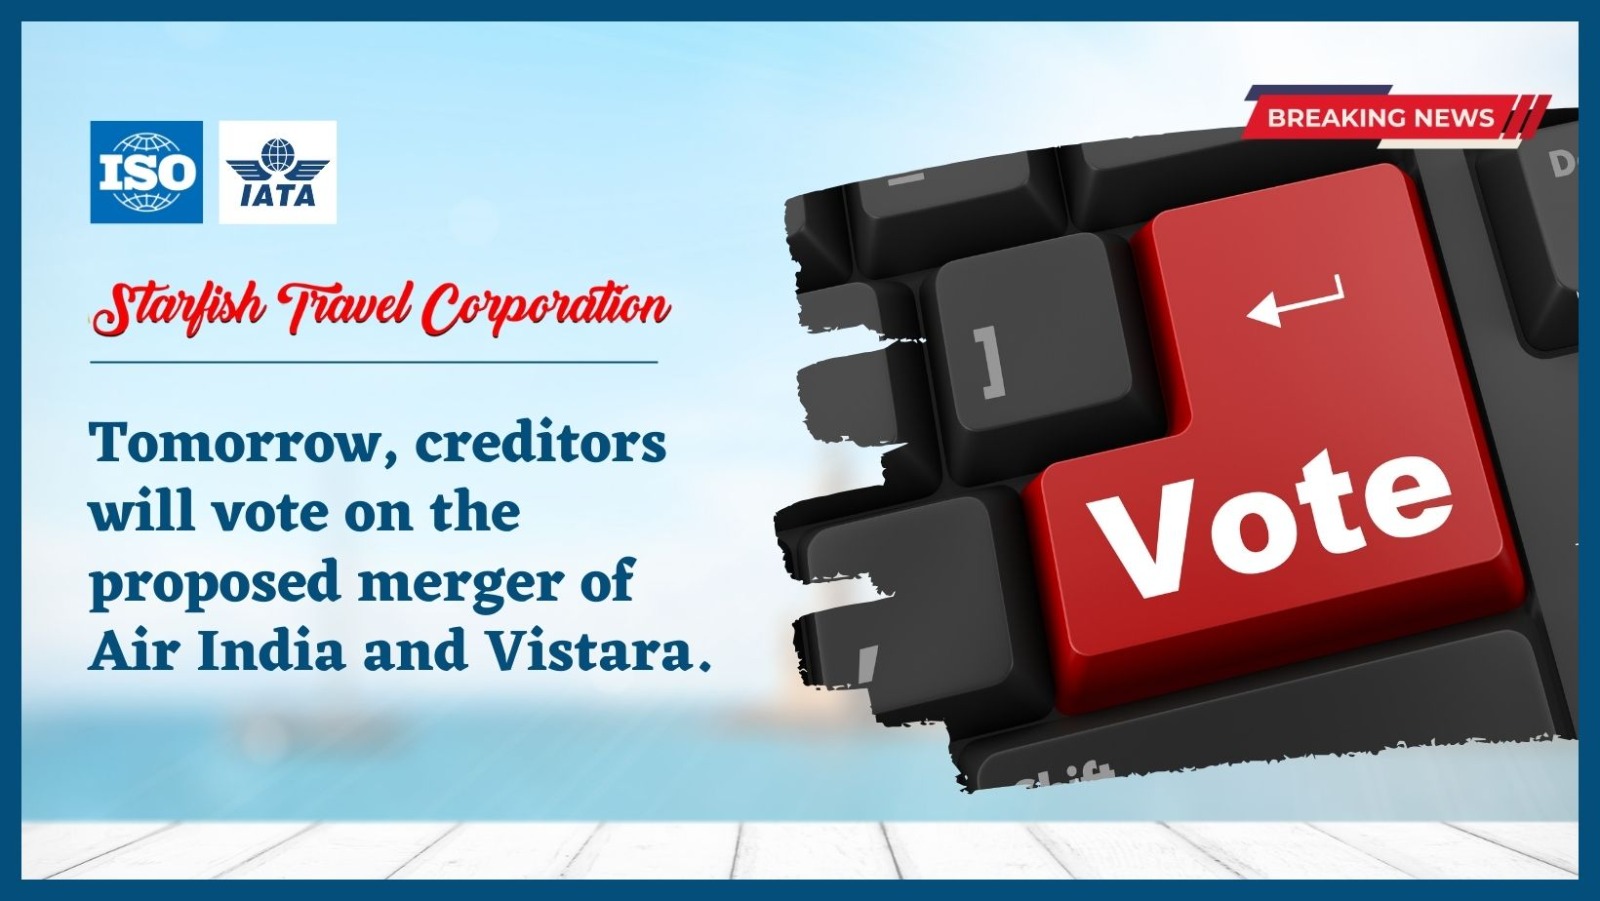 Tomorrow, creditors will vote on the proposed merger of Air India and Vistara.